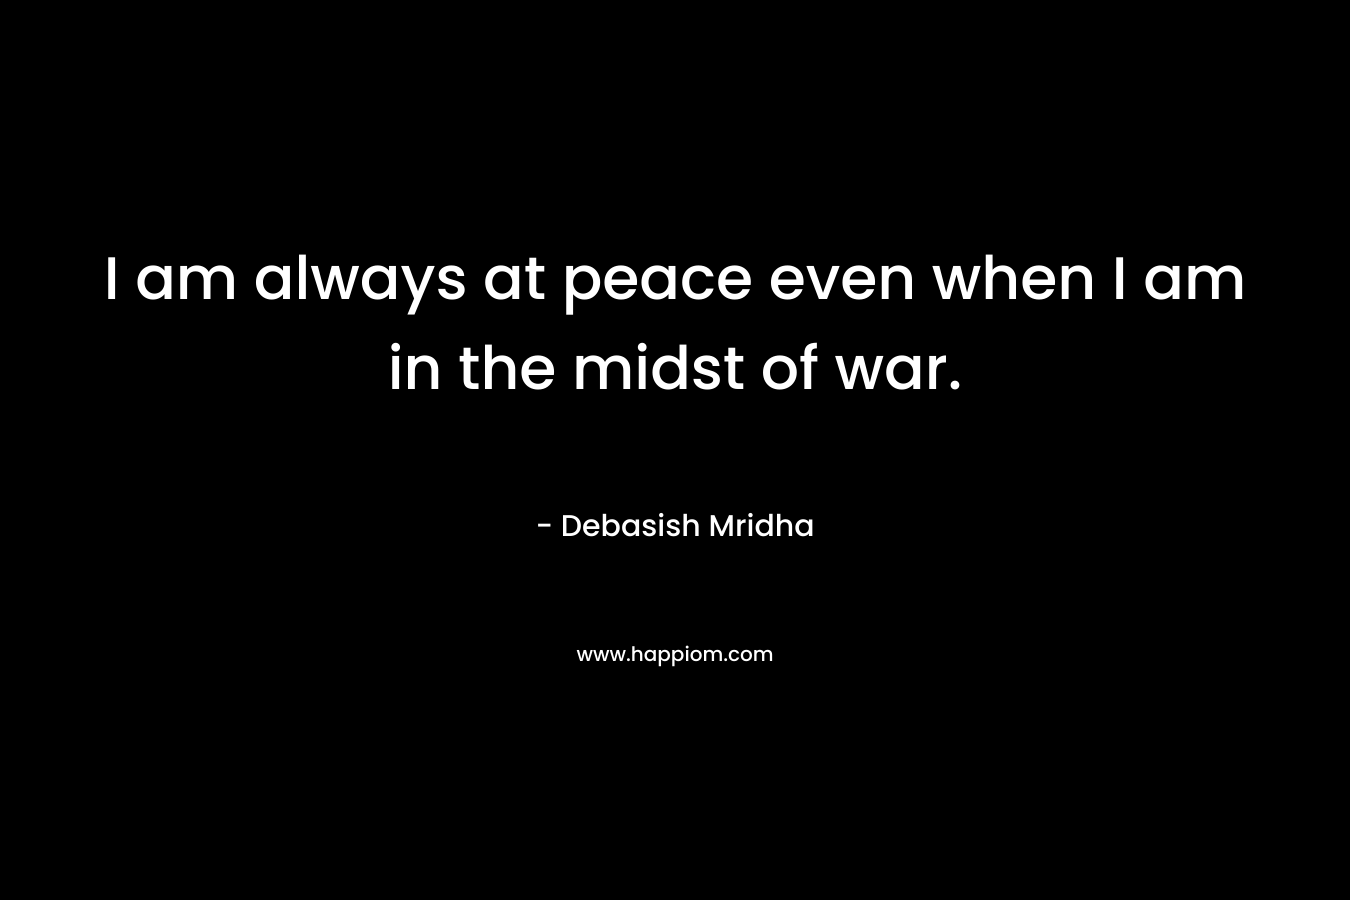 I am always at peace even when I am in the midst of war.